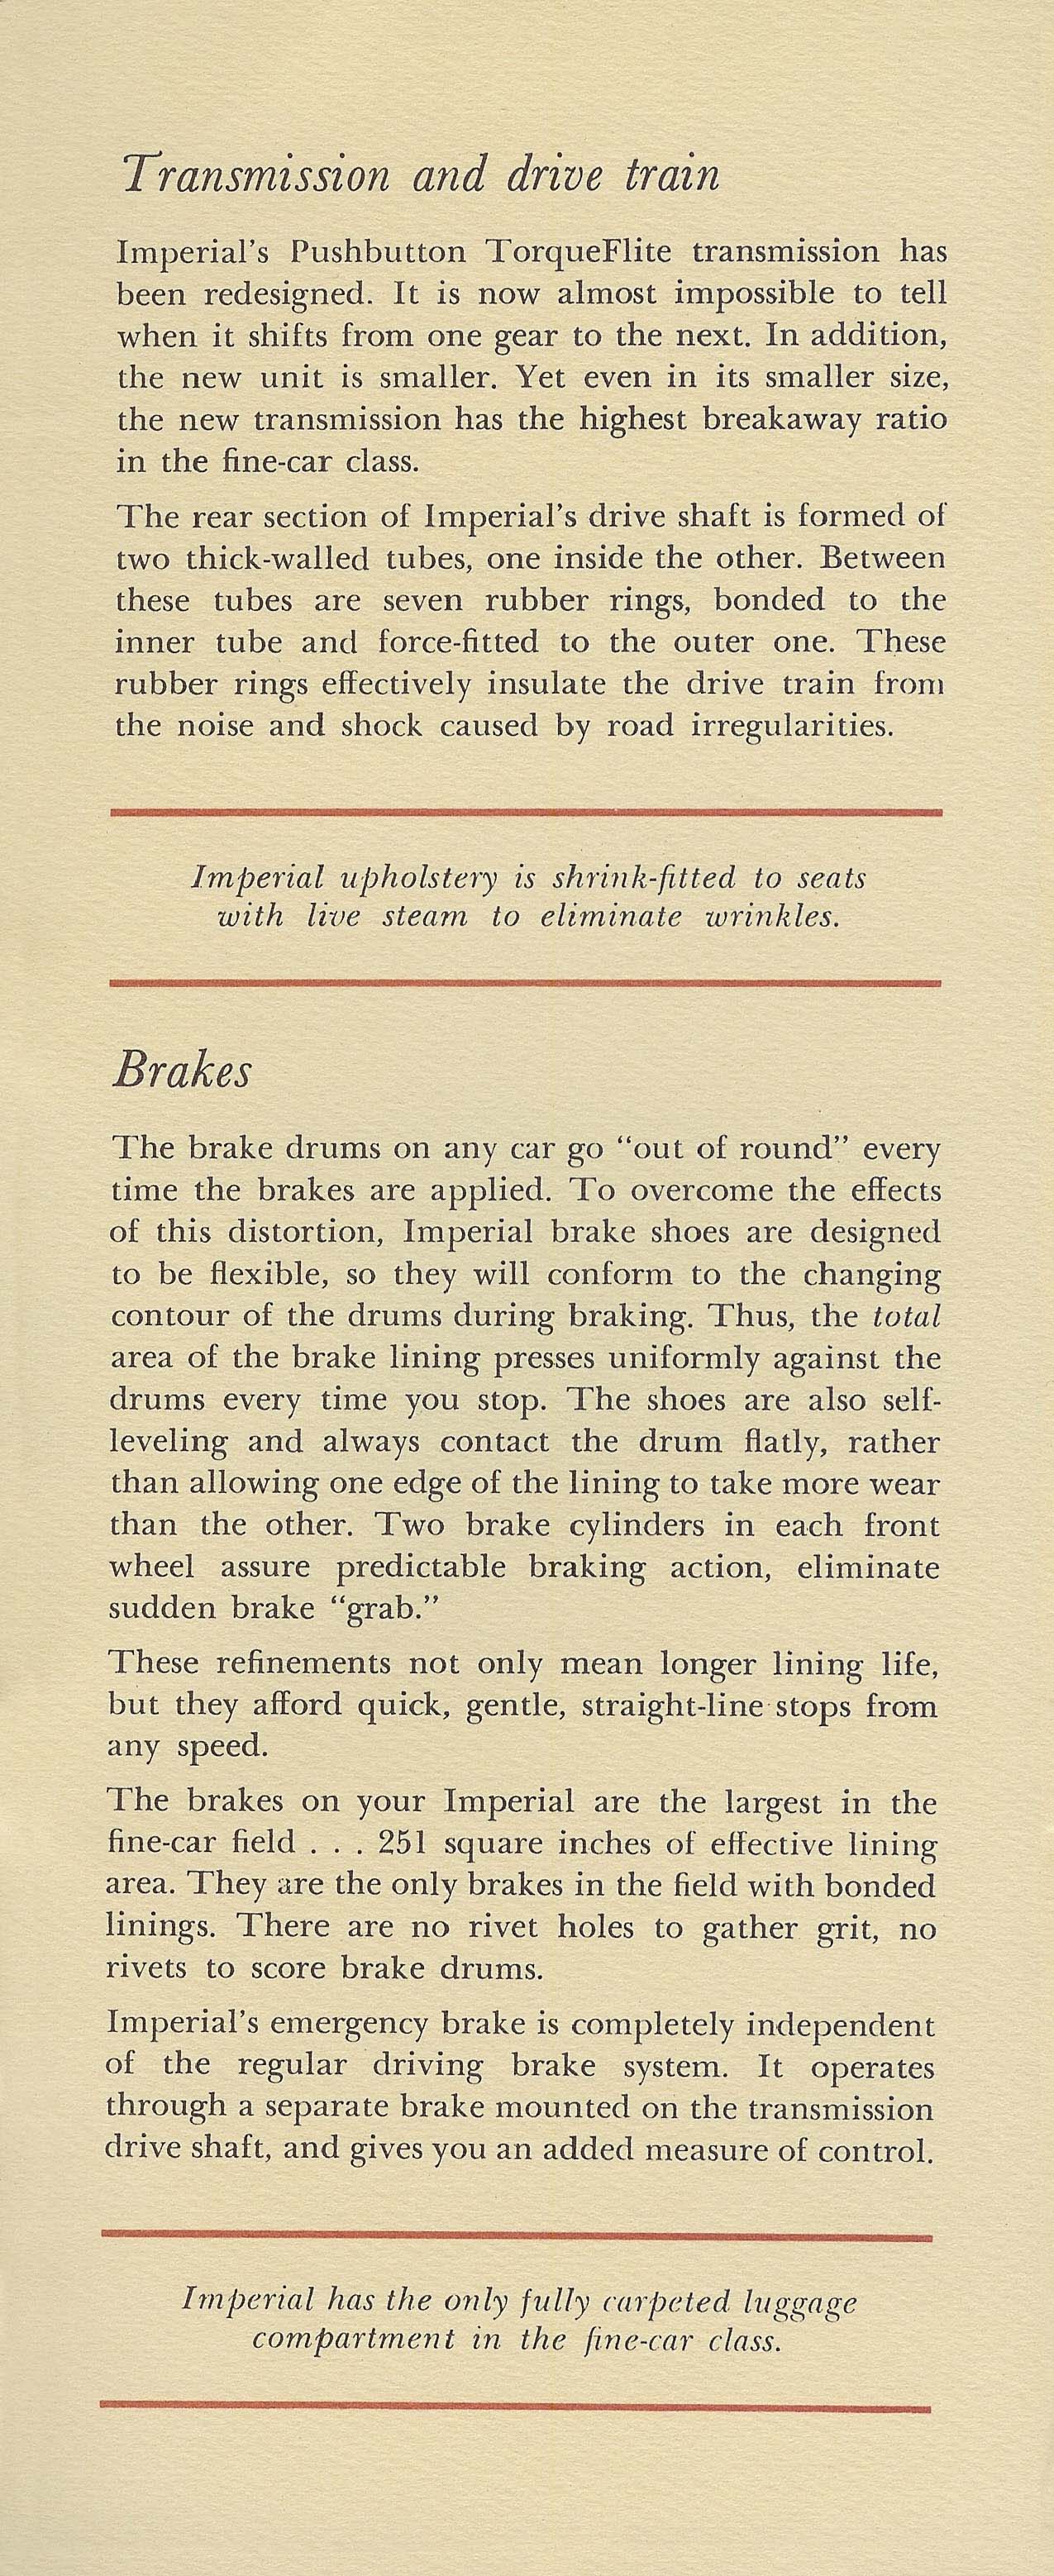 1962 Chrysler Imperial Guide Page 2